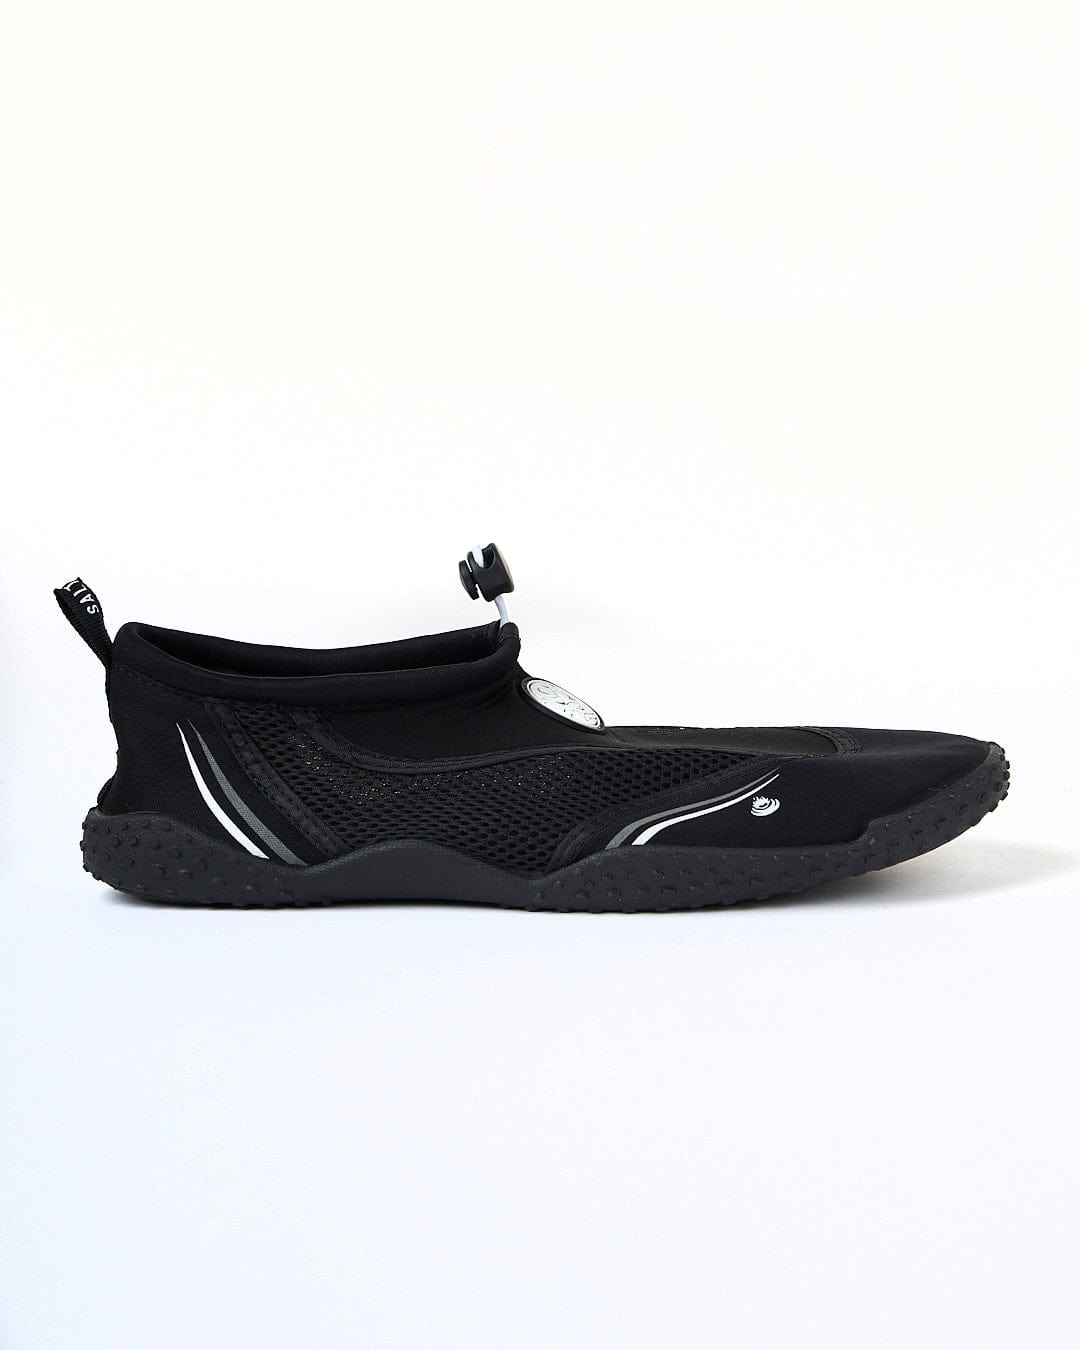 A black Saltrock Core Aqua Shoe with a white logo on the side, featuring a drawstring closure and a textured sole for added protection.